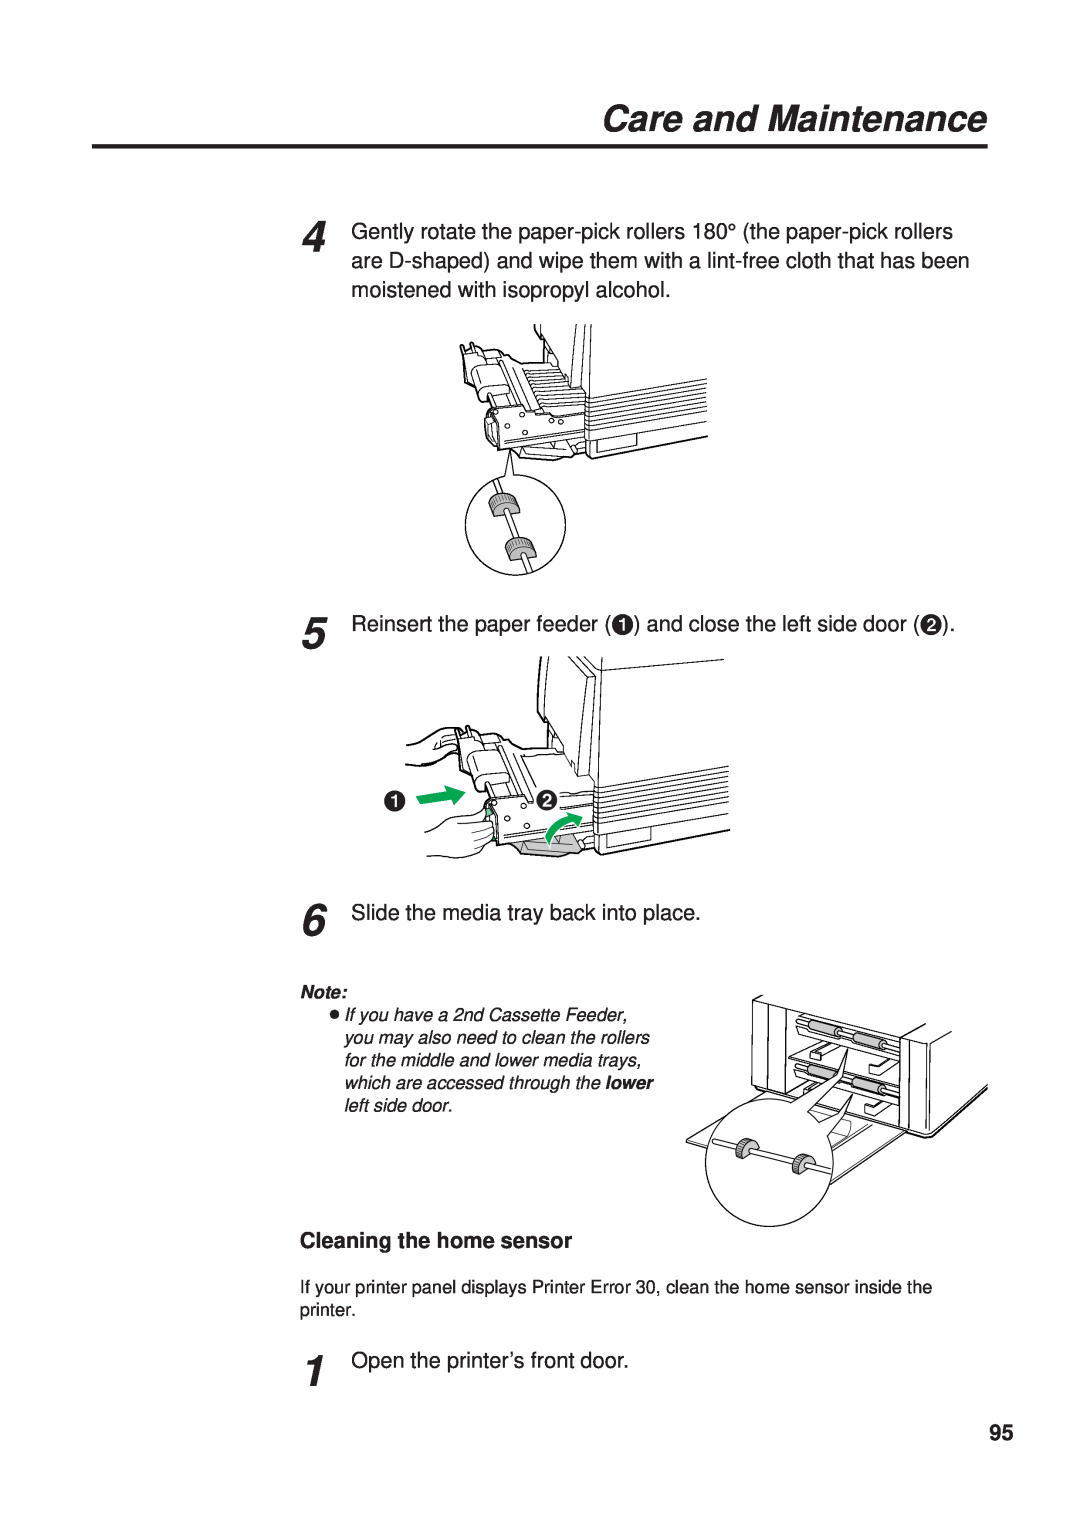 Panasonic KX-PS8000 manual Cleaning the home sensor, Care and Maintenance 